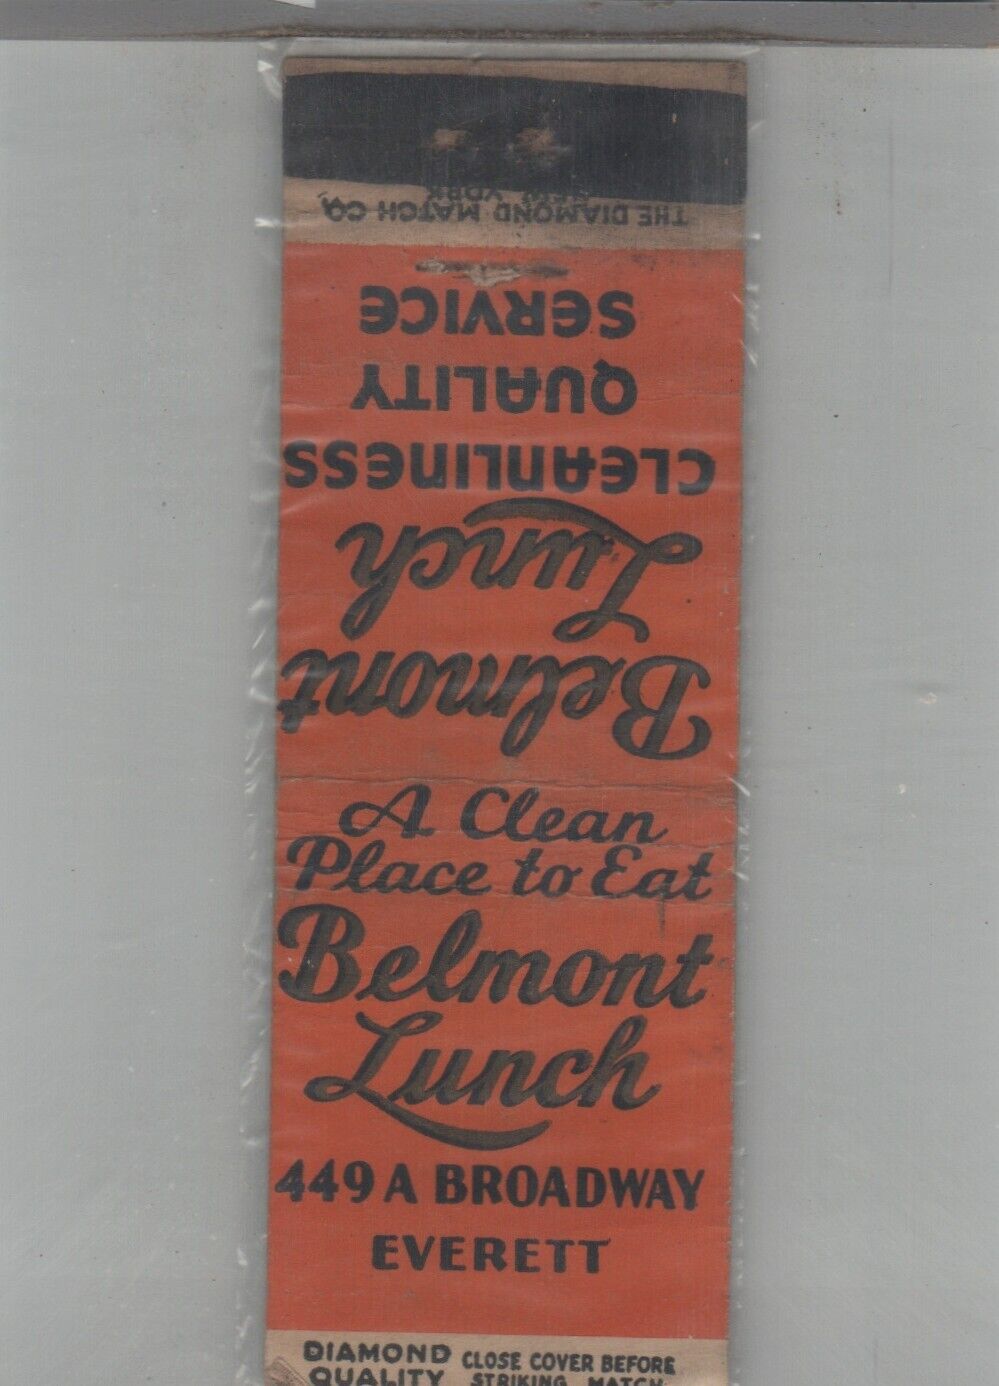 Matchbook Cover 1930s Diamond Quality Belmont Lunch Everett, MA